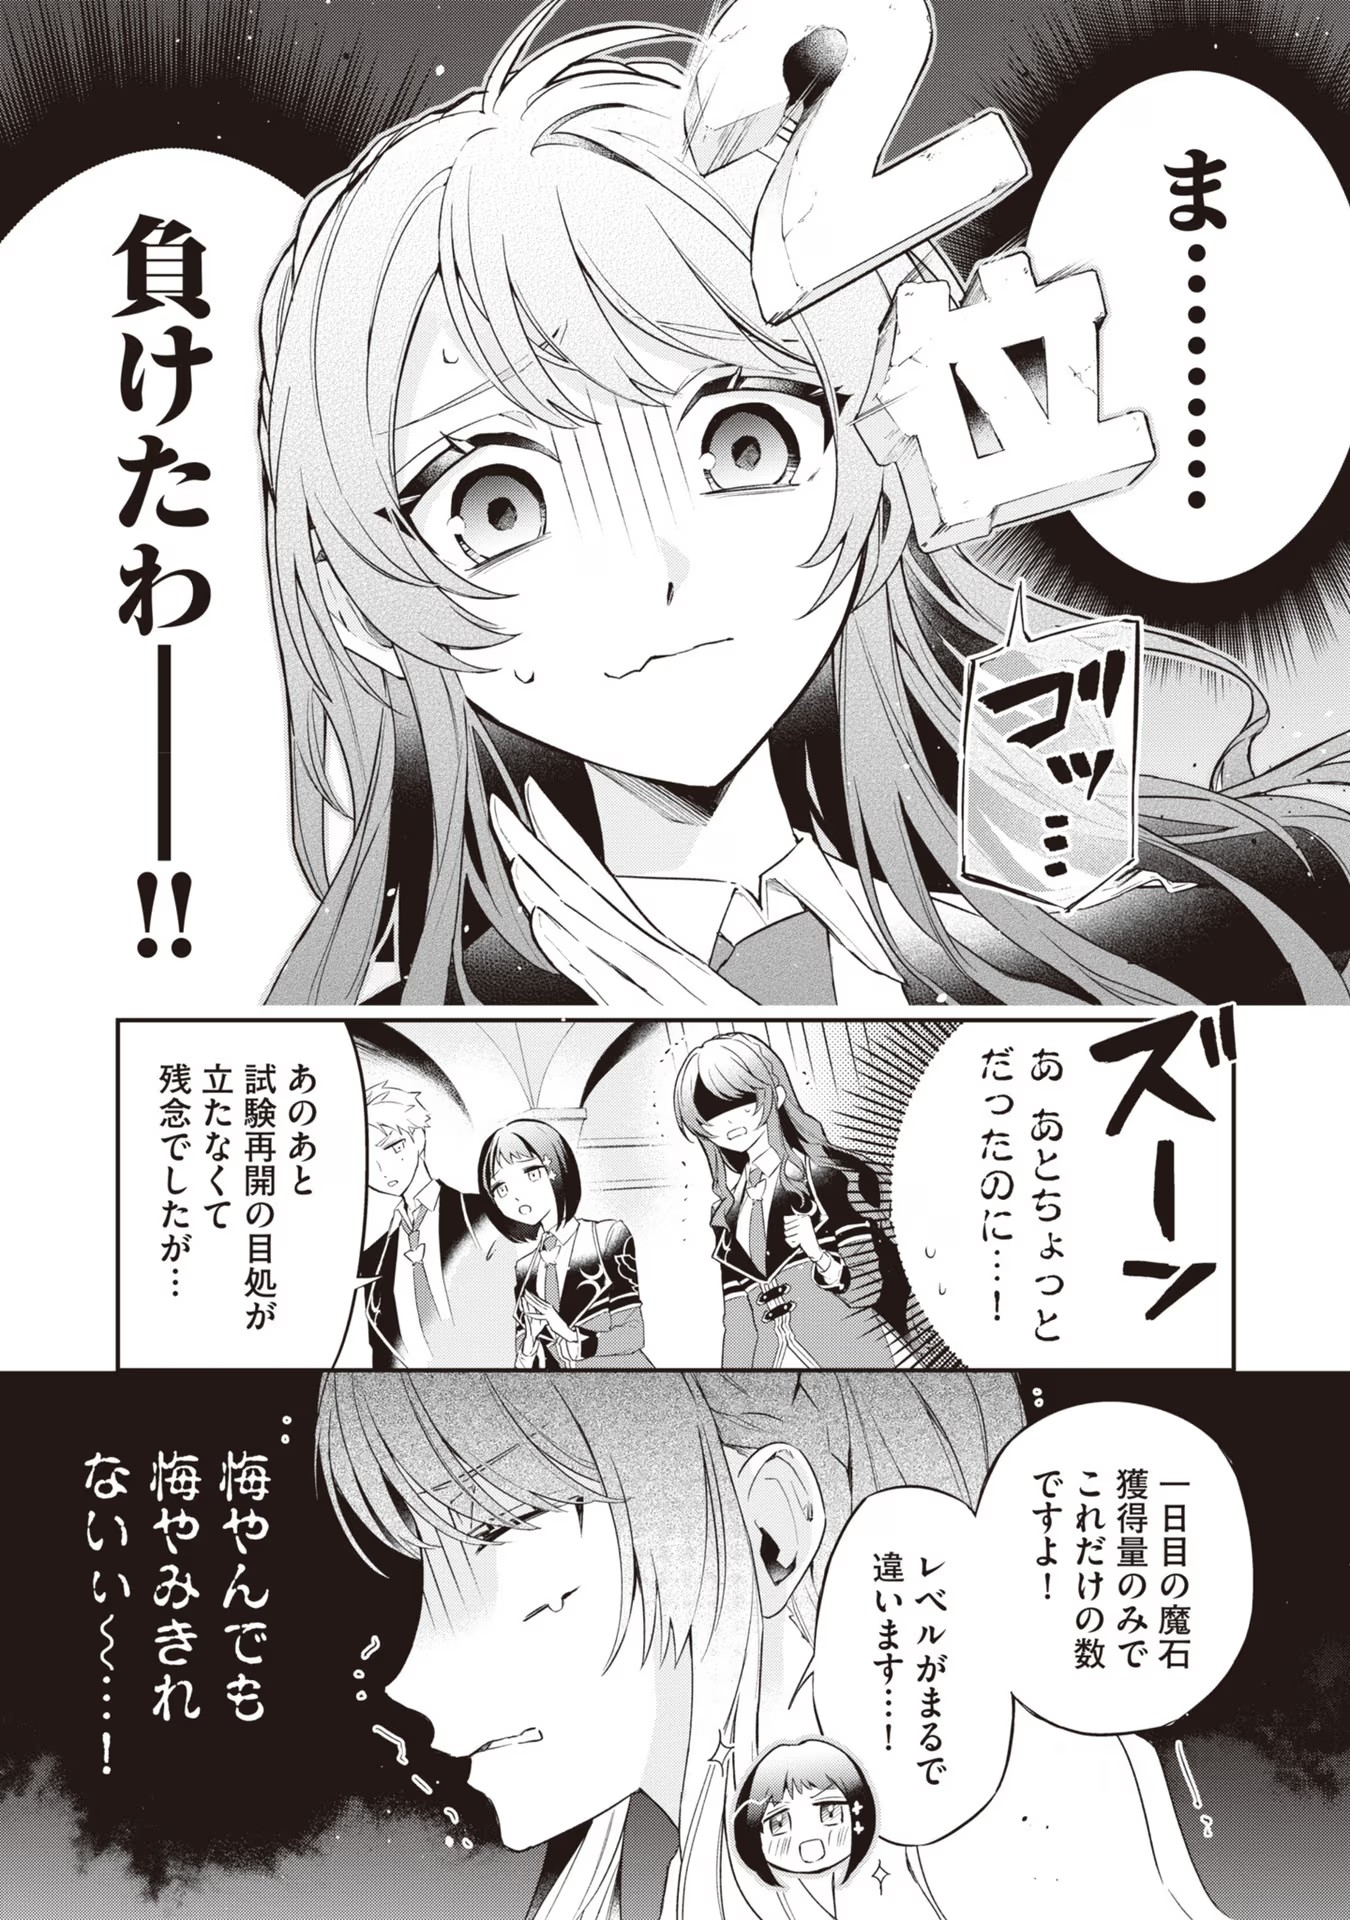 Kyou mo Reisoku to Kisoiatte Iru you desu If the Villainess and the Villain Were to Meet and Fall in Love ~It Seems the Shunned Heroine Who Formed a Contract With an Unnamed Spirit Is Fighting With the Nobleman Yet Again~ If the Villainess and Villain Met 第14話 - Page 10